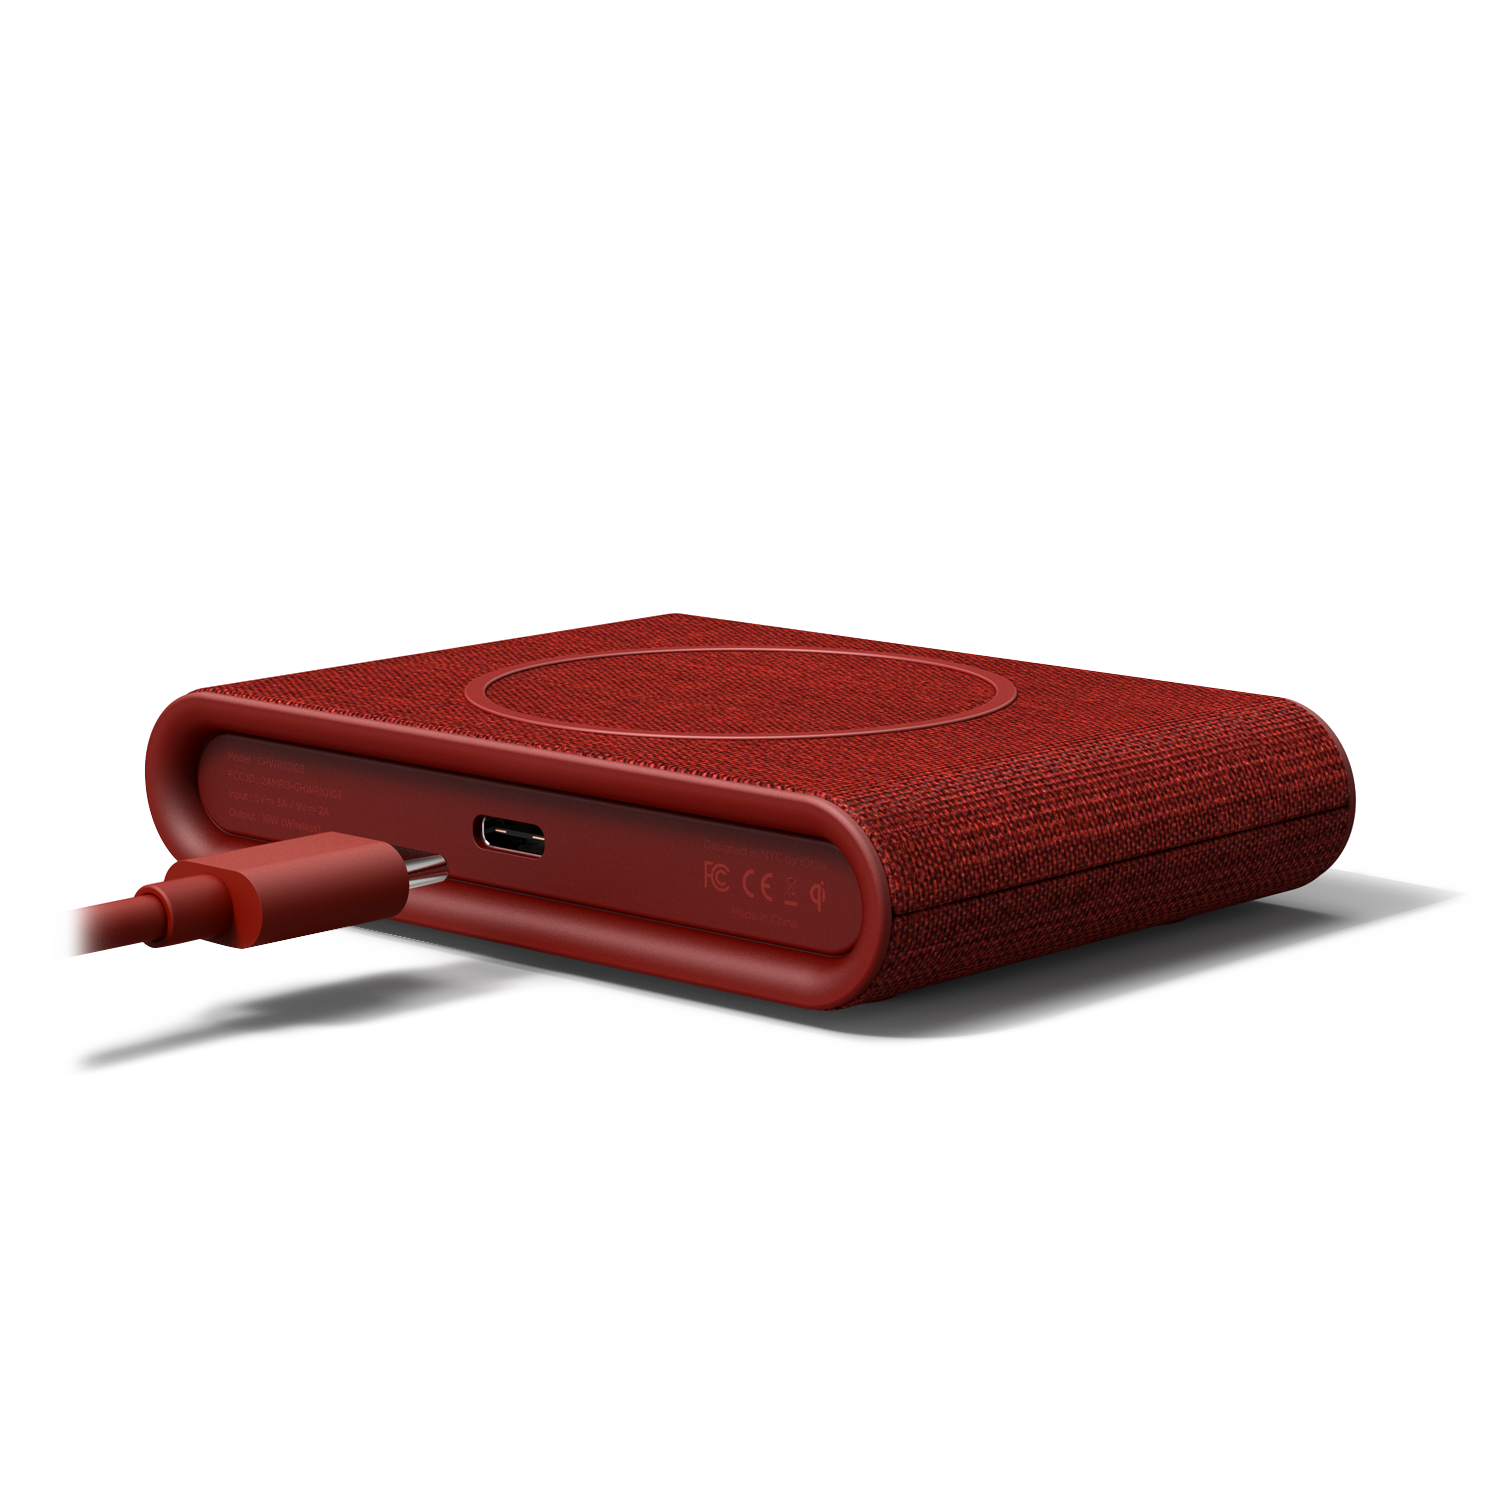 Rear View of the iON Wireless Mini Charging Pad in Ruby